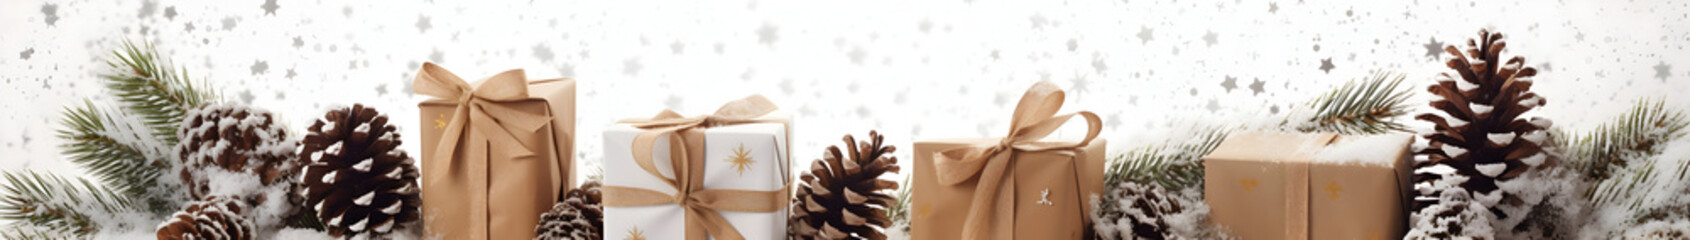 Fototapeta na wymiar Rustic Christmas gifts with brown ribbons, pine cones, spruce and fir branches and decorations in a row on white snowy abstract background. Horizontal composition, side view.